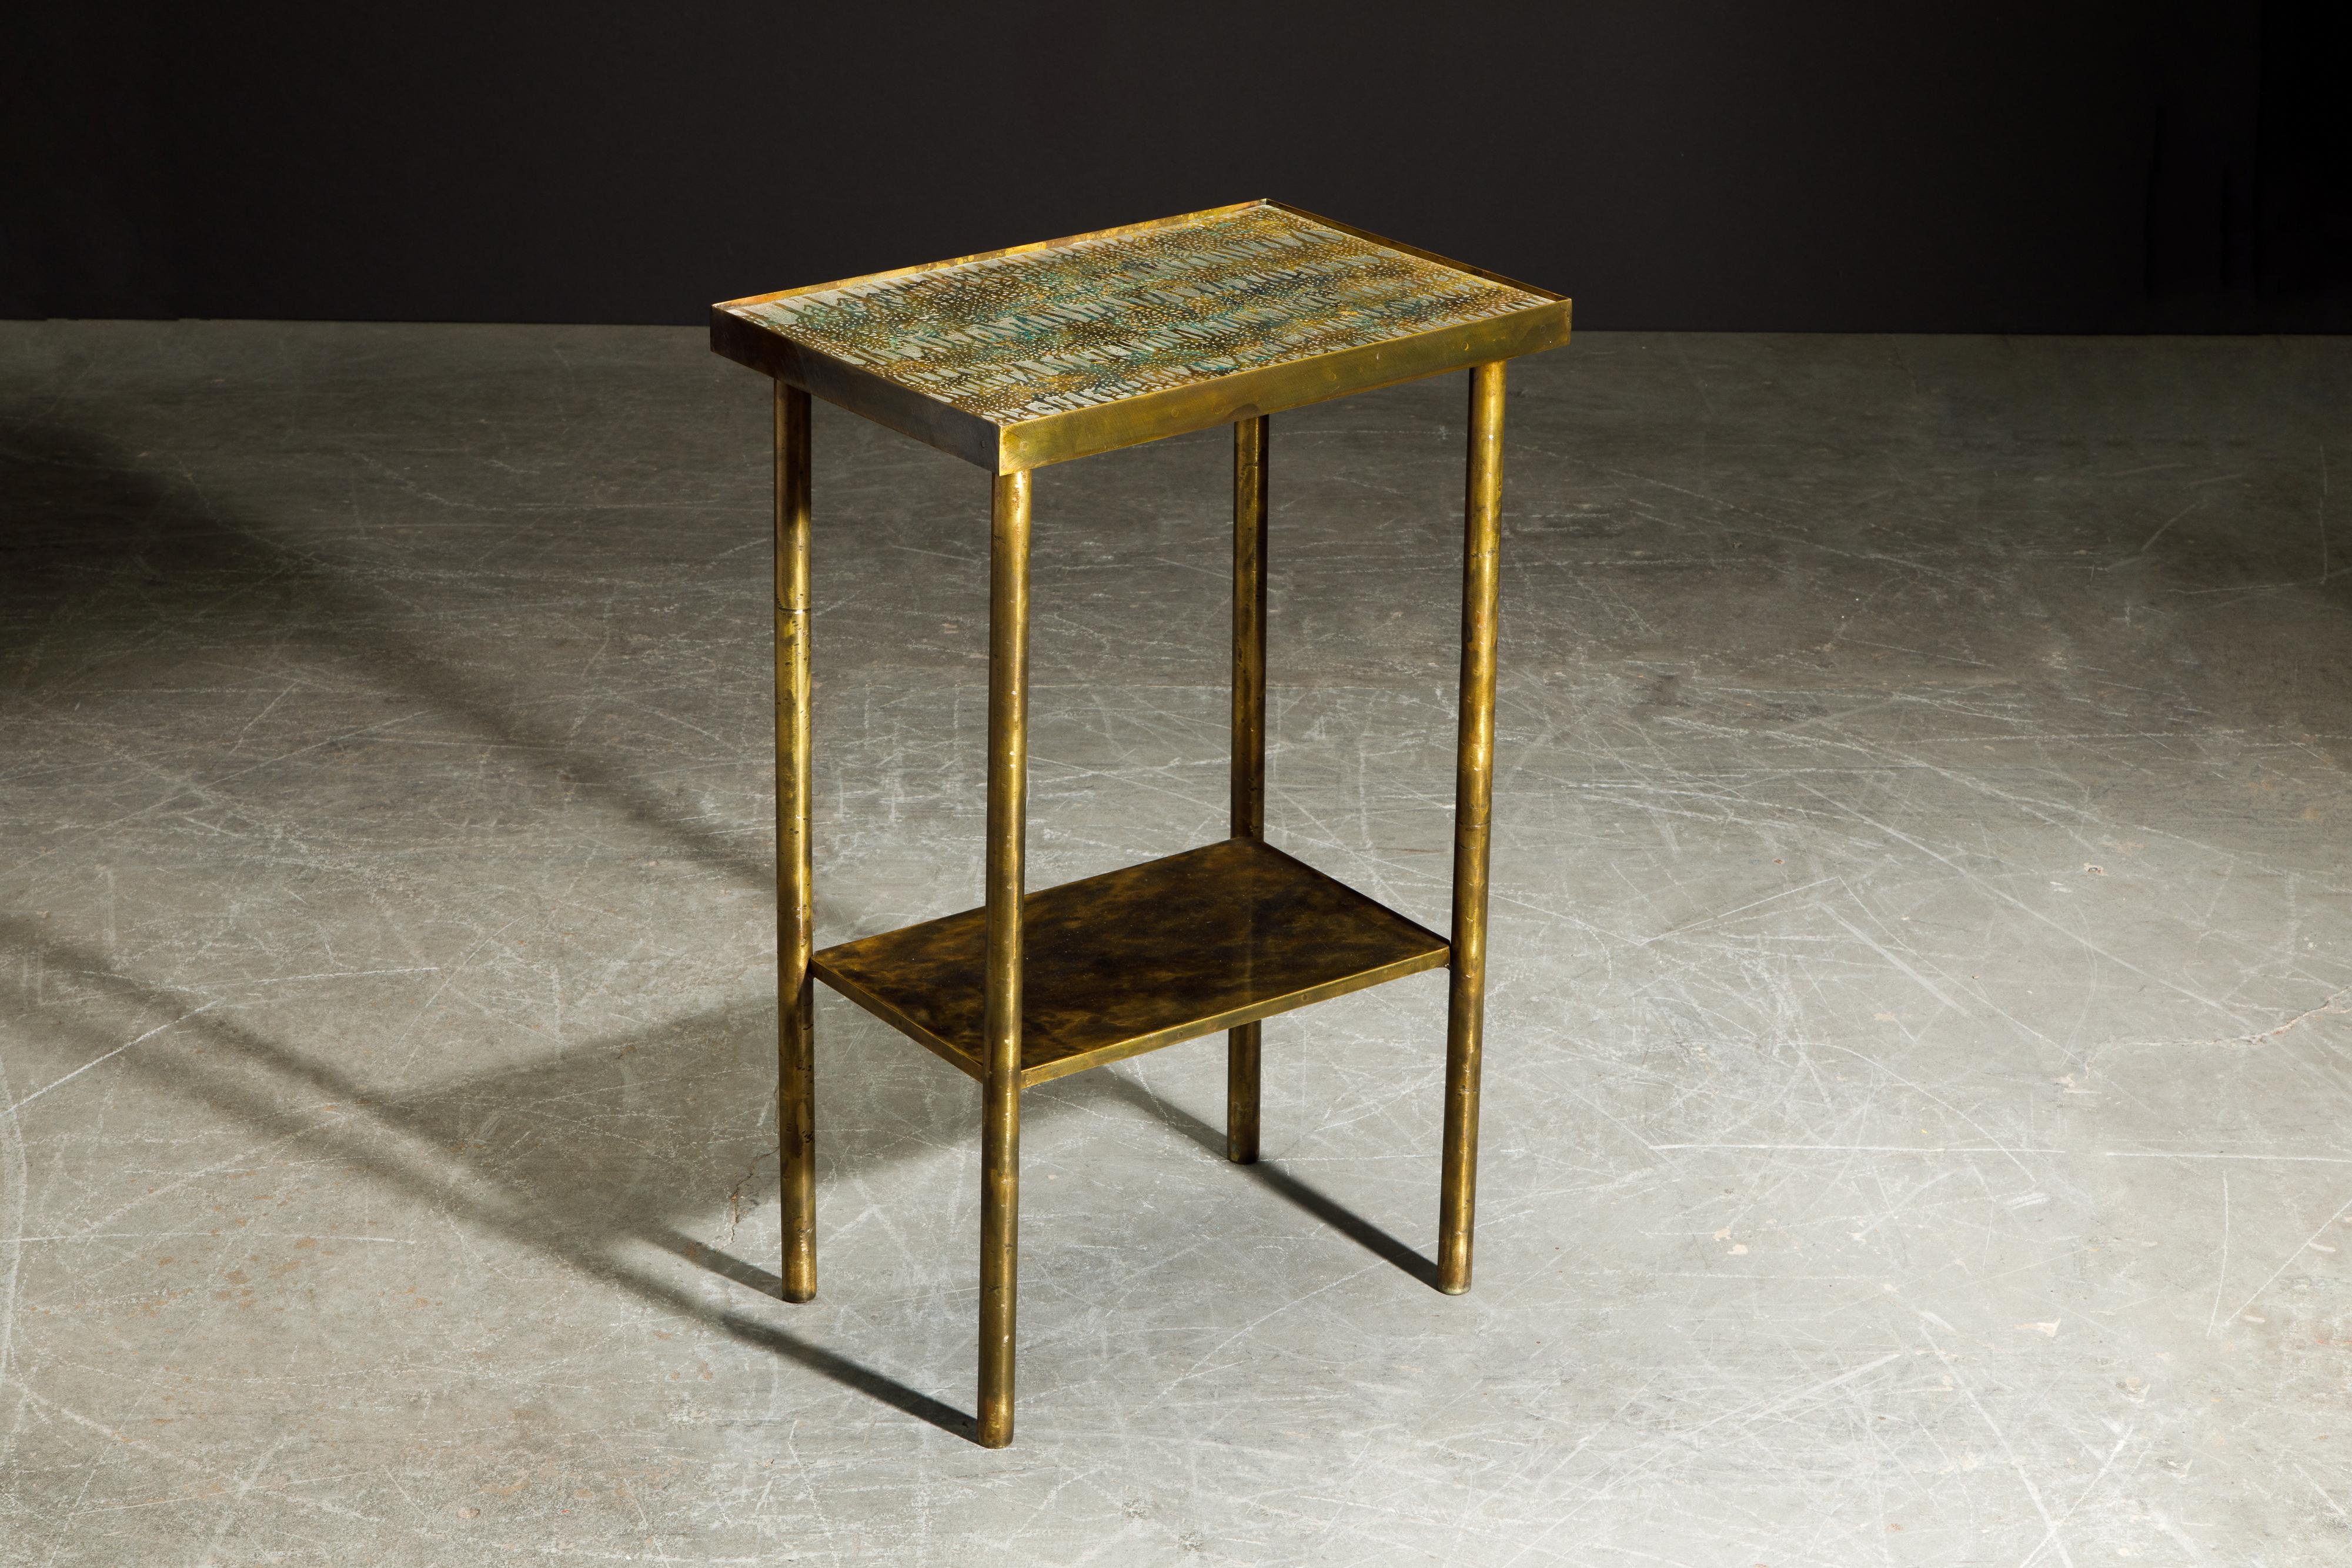 Hand-Crafted Eternal Forest Bronze Drinks / Laptop Table by Philip and Kelvin LaVerne, c 1965